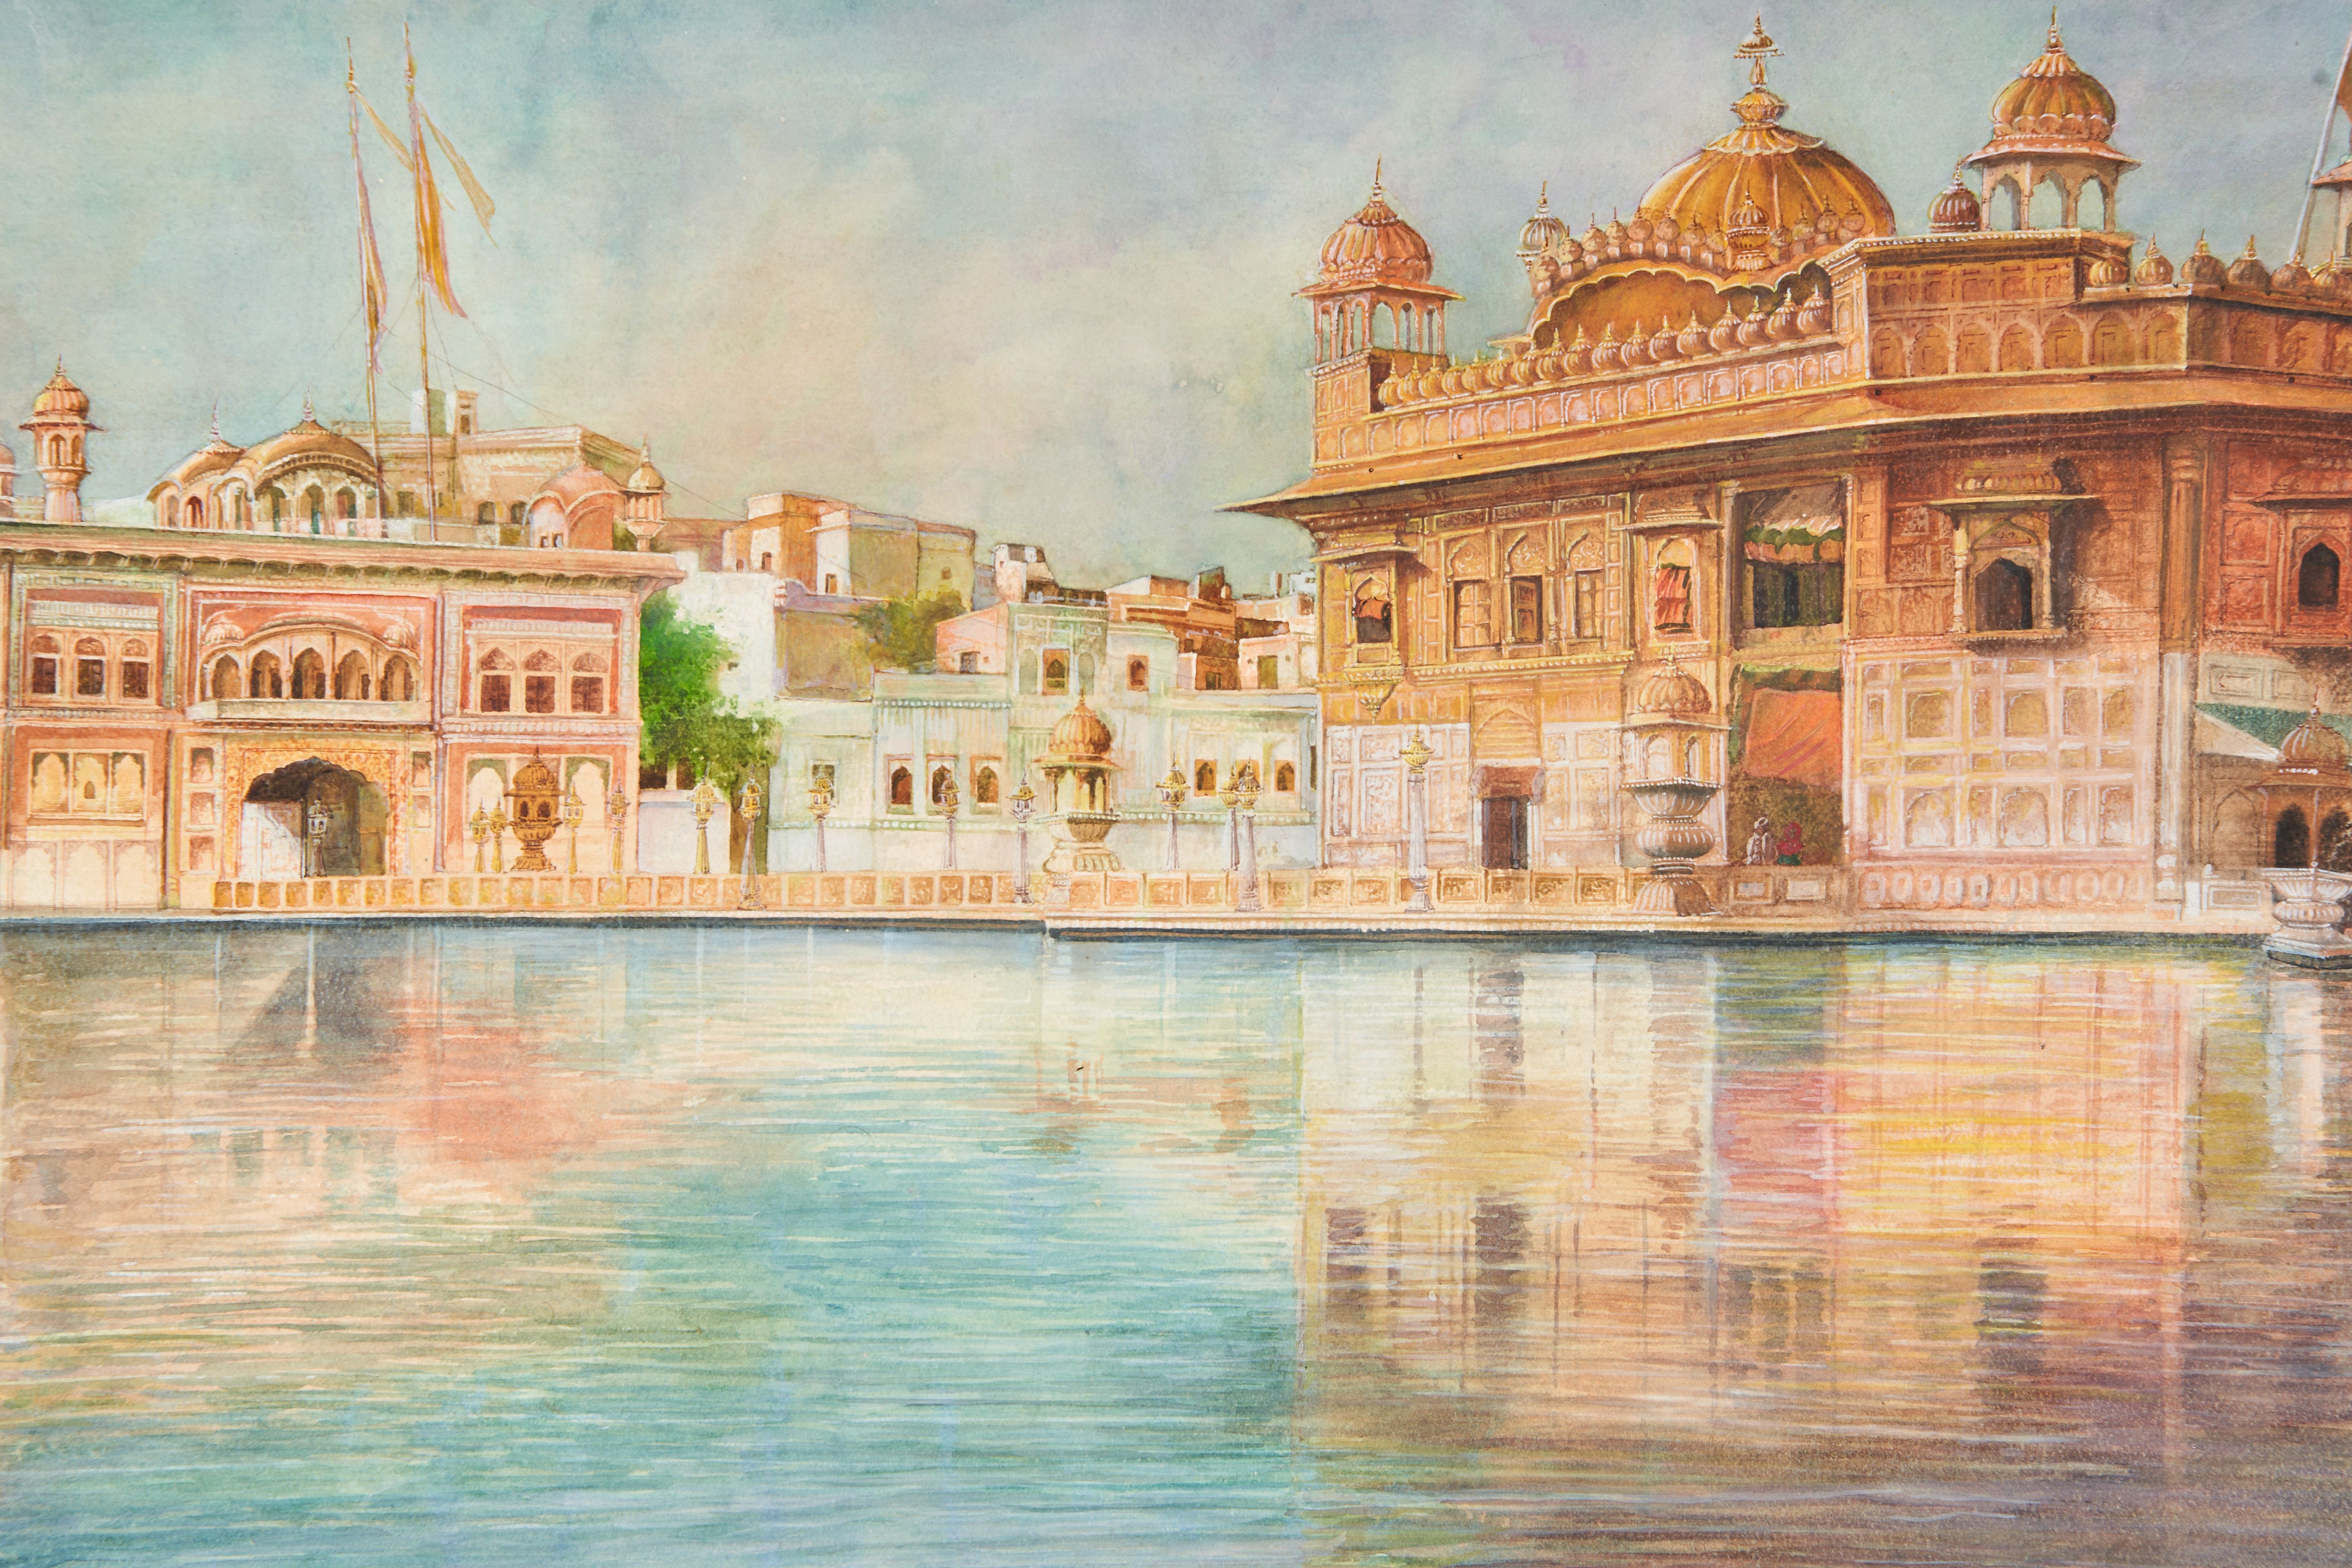 S.G. THAKAR SINGH "THE GOLDEN TEMPLE OF AMRITSAR" SIGNED & DATED 1954 LOWER RIGHT, WATERCOLOUR ON A - Image 2 of 3